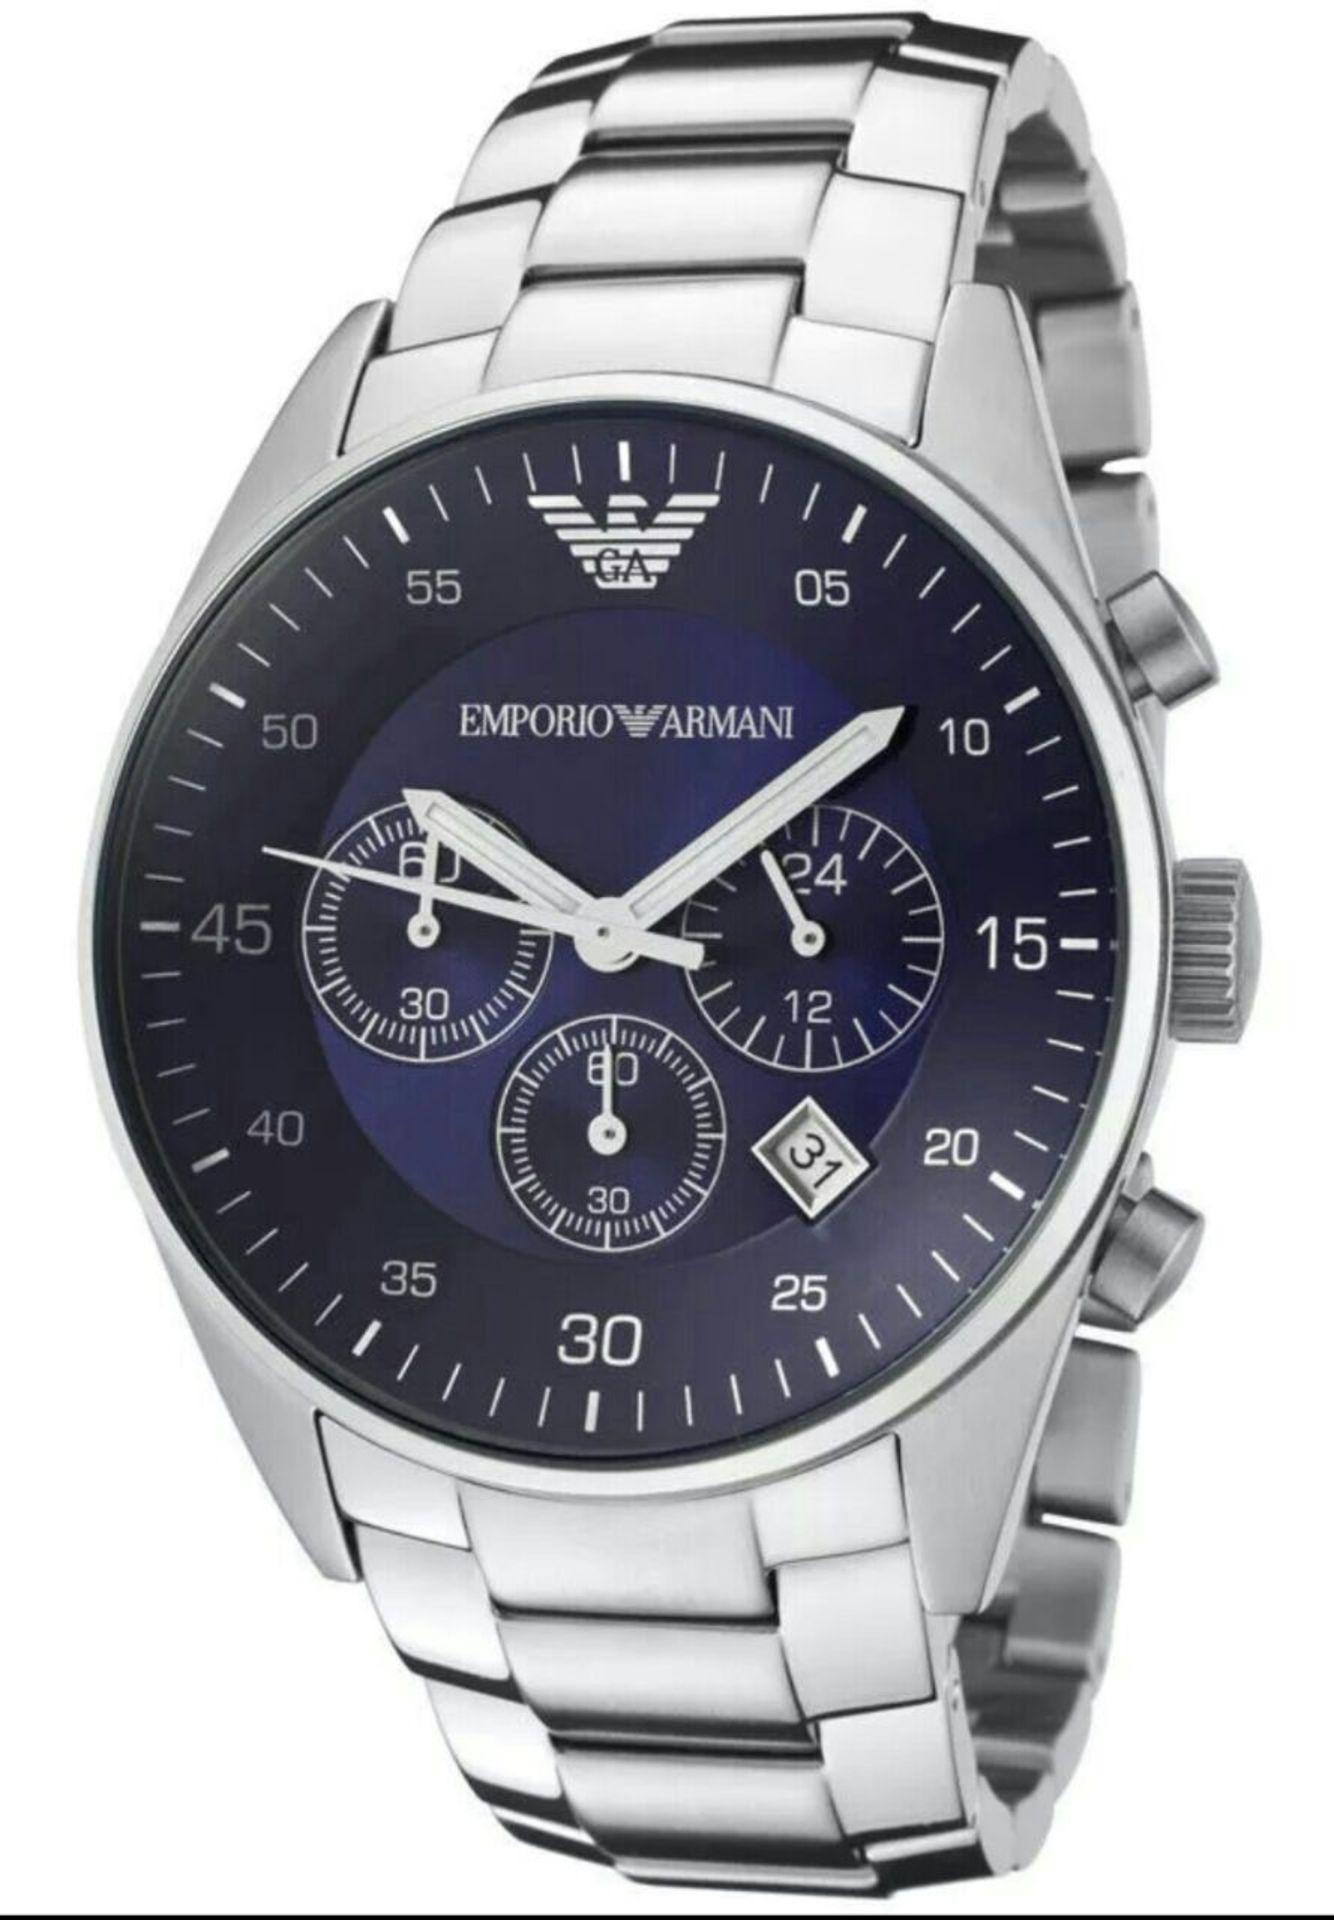 BRAND NEW EMPORIO ARMANI AR5860, GENTSPOLISHED STAINLESS STEEL BRACELET WATCH, WITH A BLUE